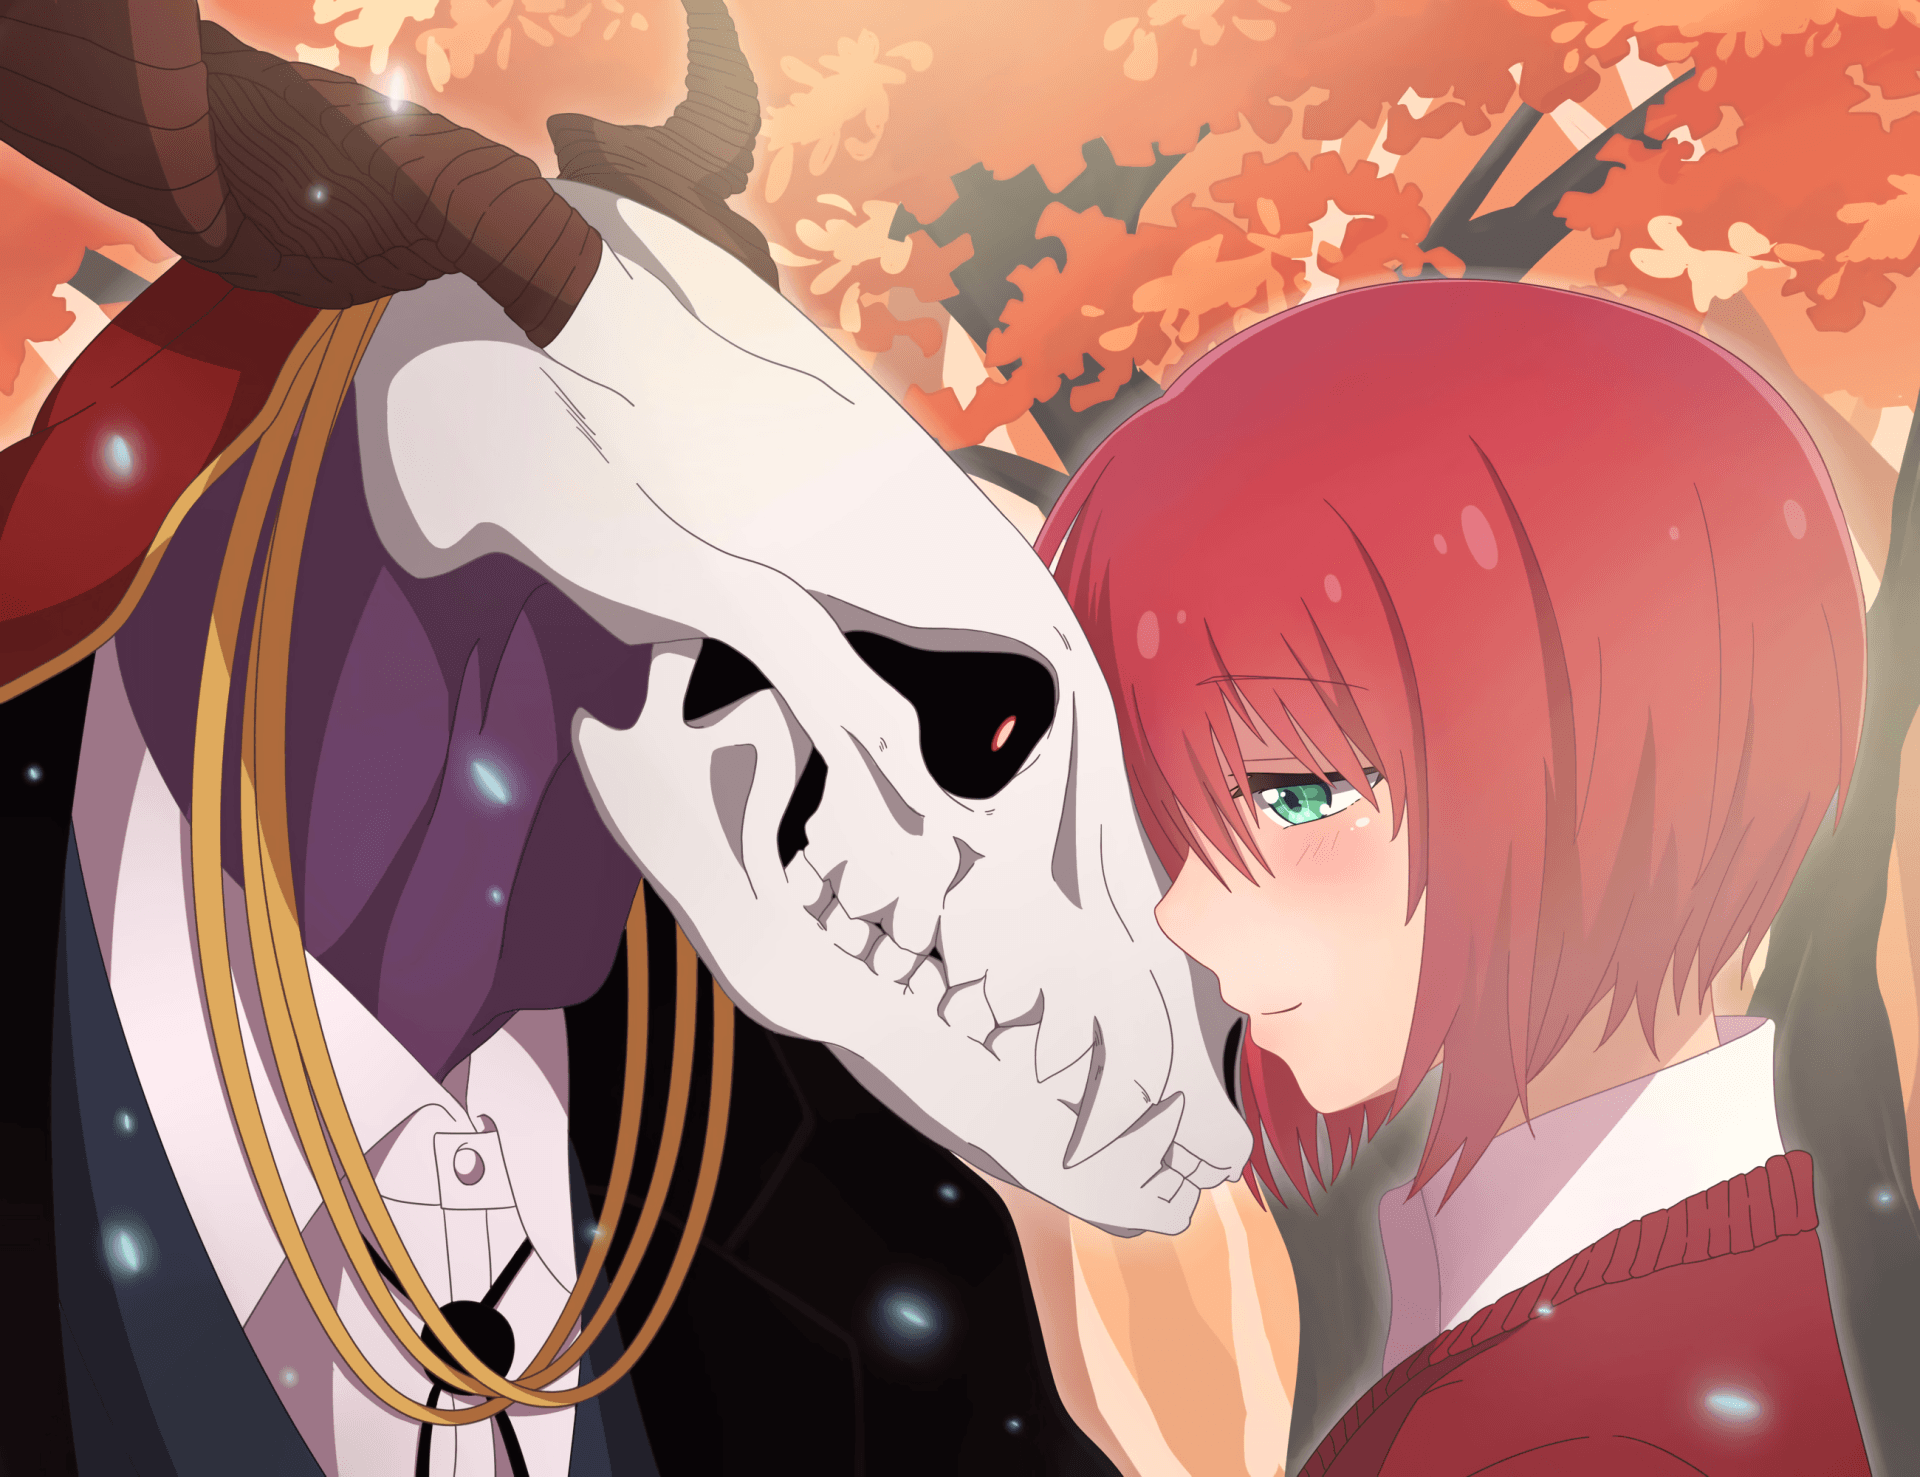 Anime The Ancient Magus' Bride Wallpaper. The ancient magus bride